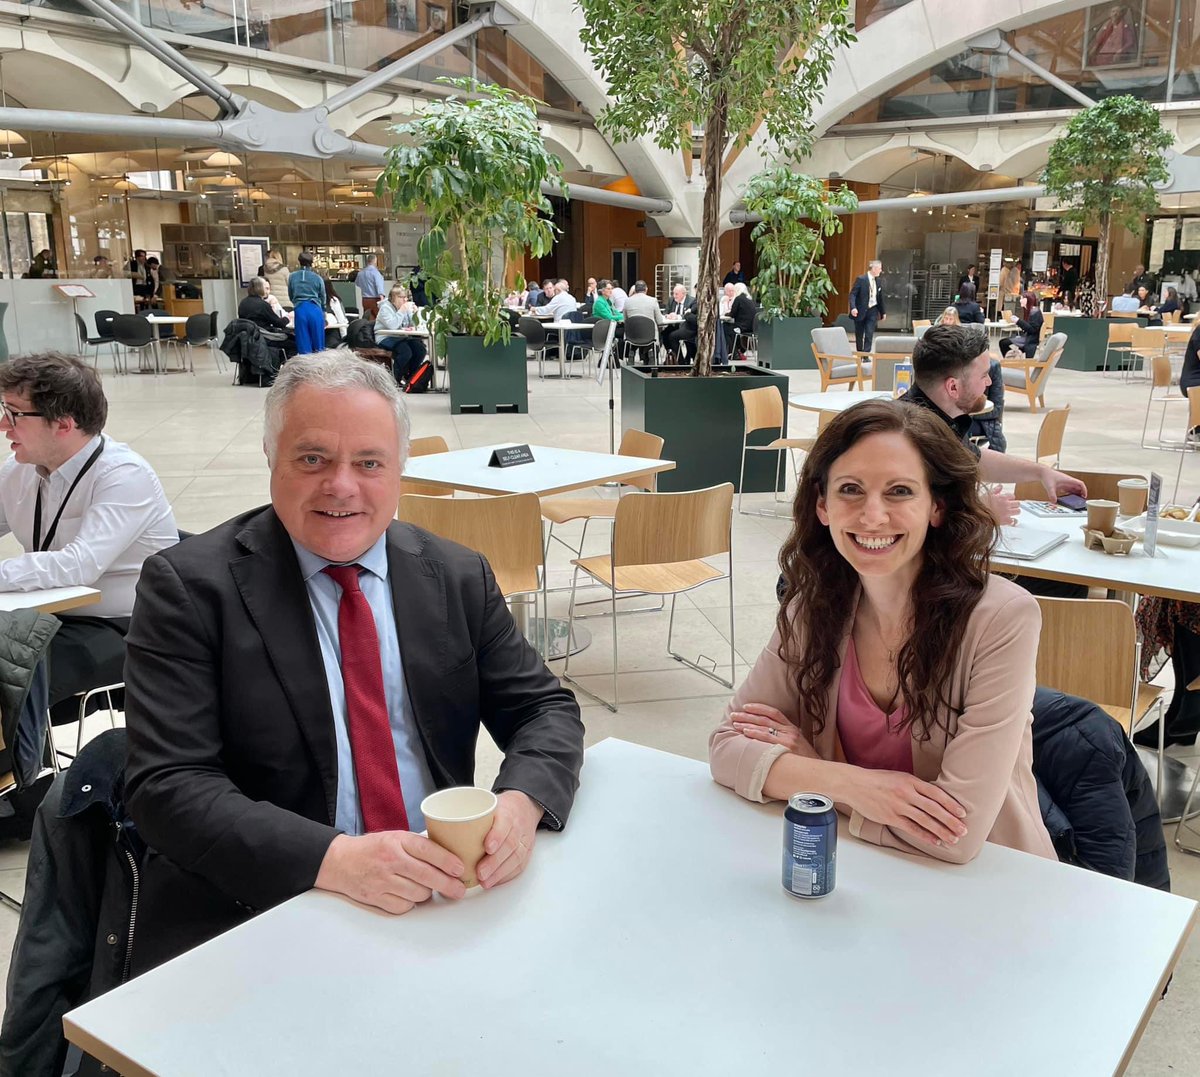 A pleasure to catch up recently in Westminster with @AphraBrandreth, the Conservative Parliamentary Candidate for our neighbouring seat of Chester South & Eddisbury, and discuss issues affecting both North Shropshire and her part of Cheshire.